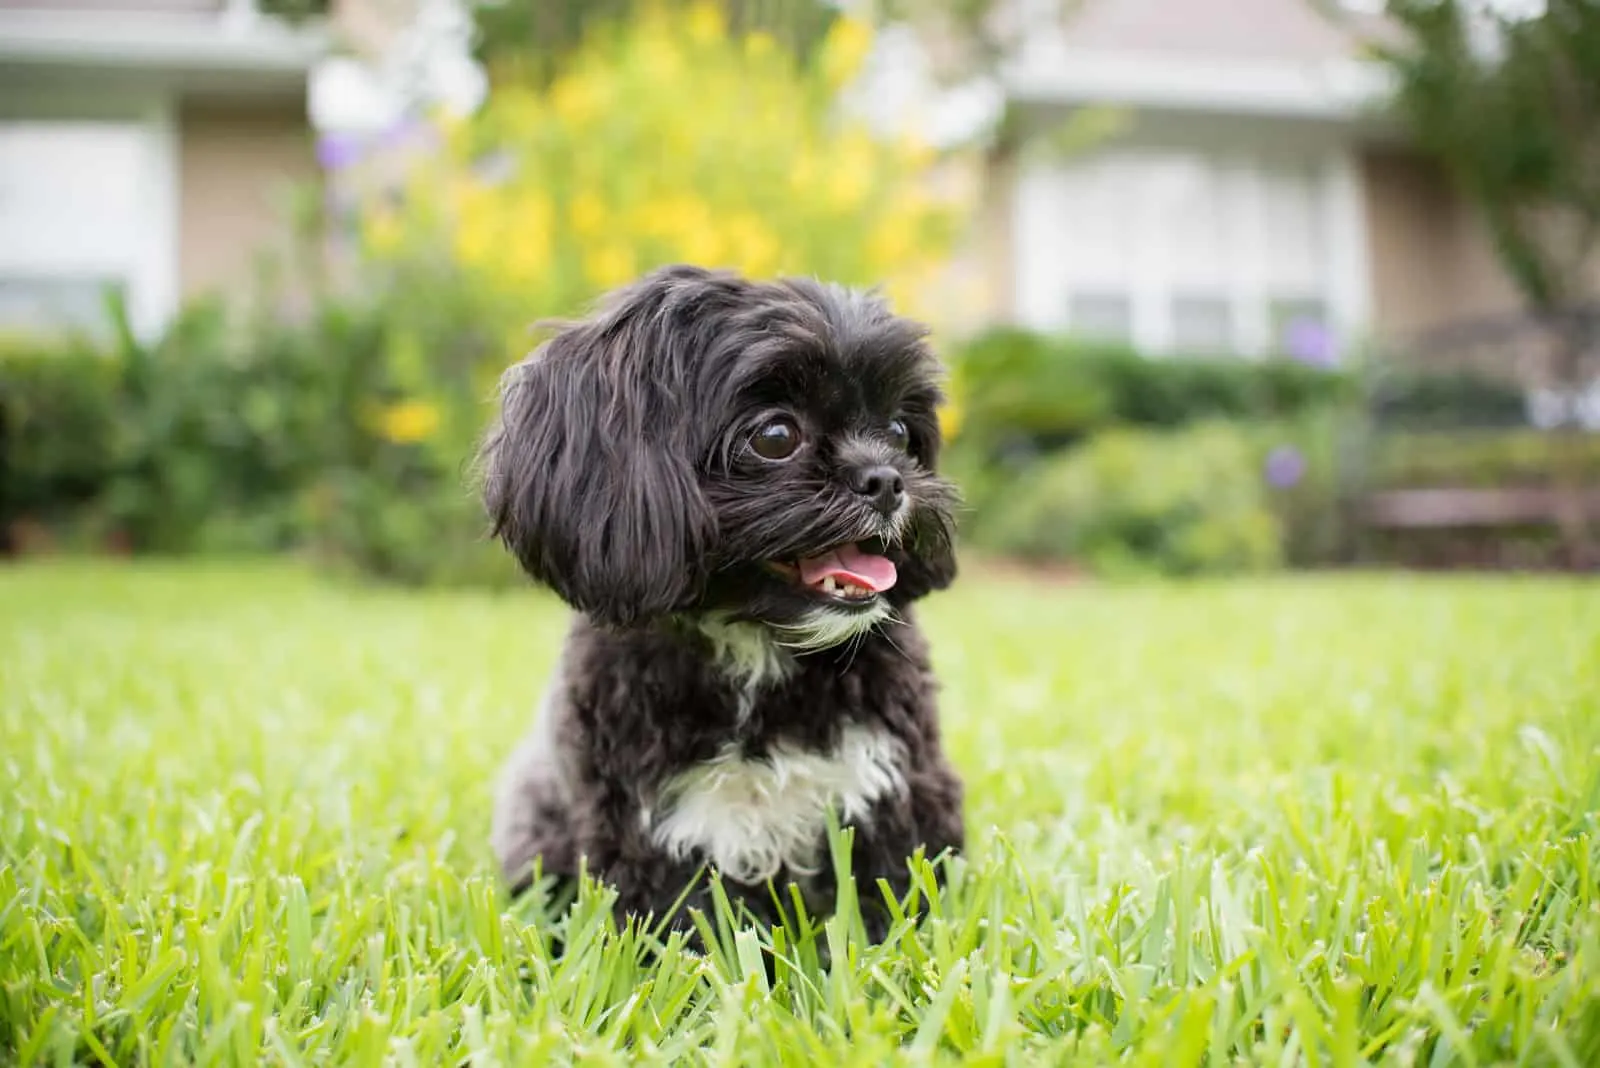 shih tzu puppy dog, white and black with short fur